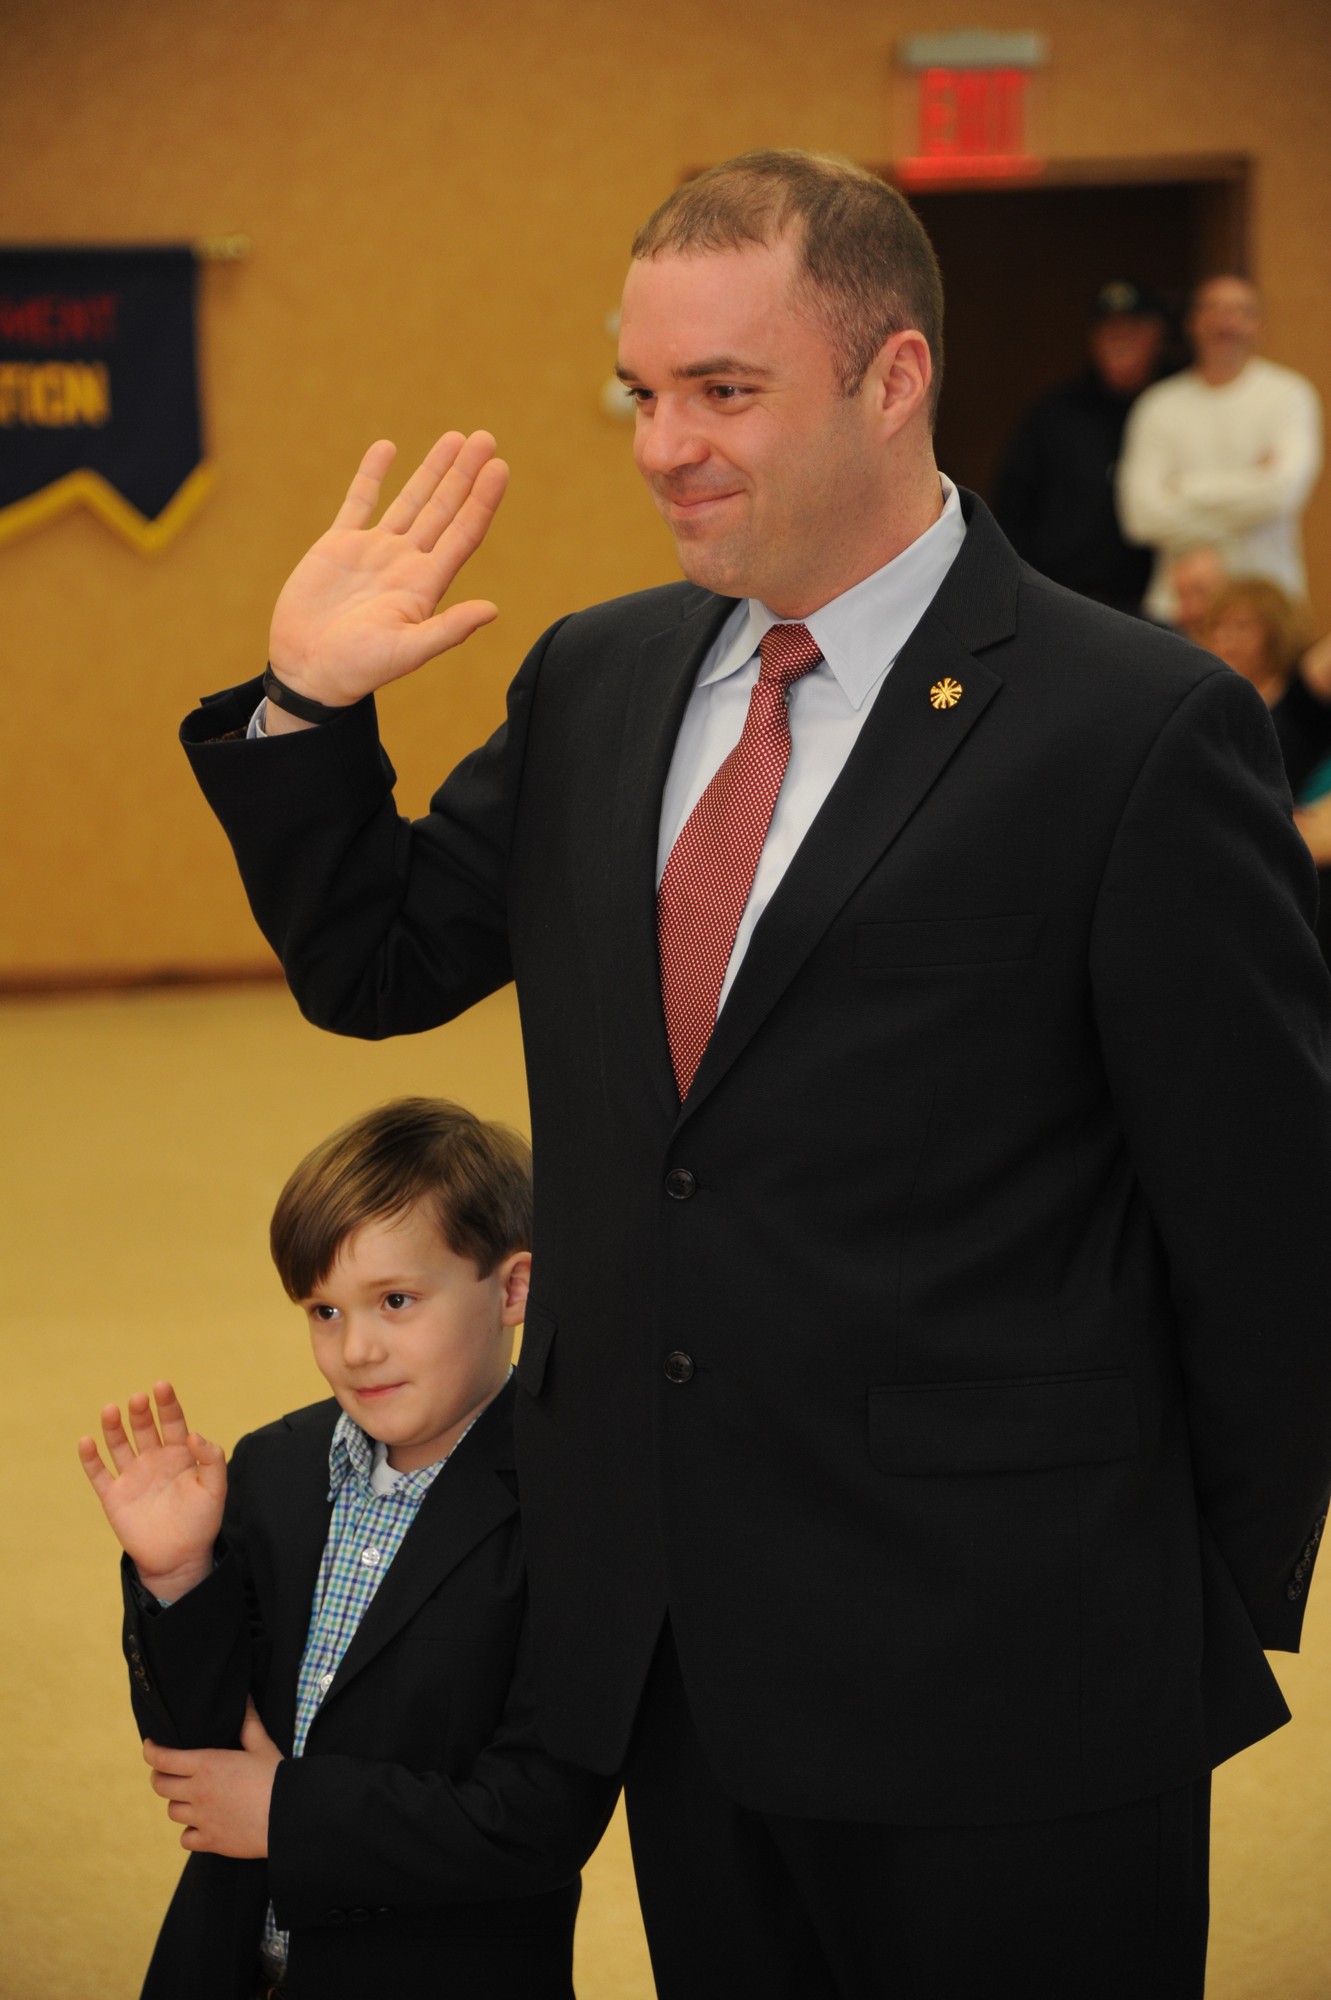 Robert Salvesen Jr., alongside his son Ryan, 5, was sworn in as the 65th Chief of the East Meadow Fire Department last Saturday.